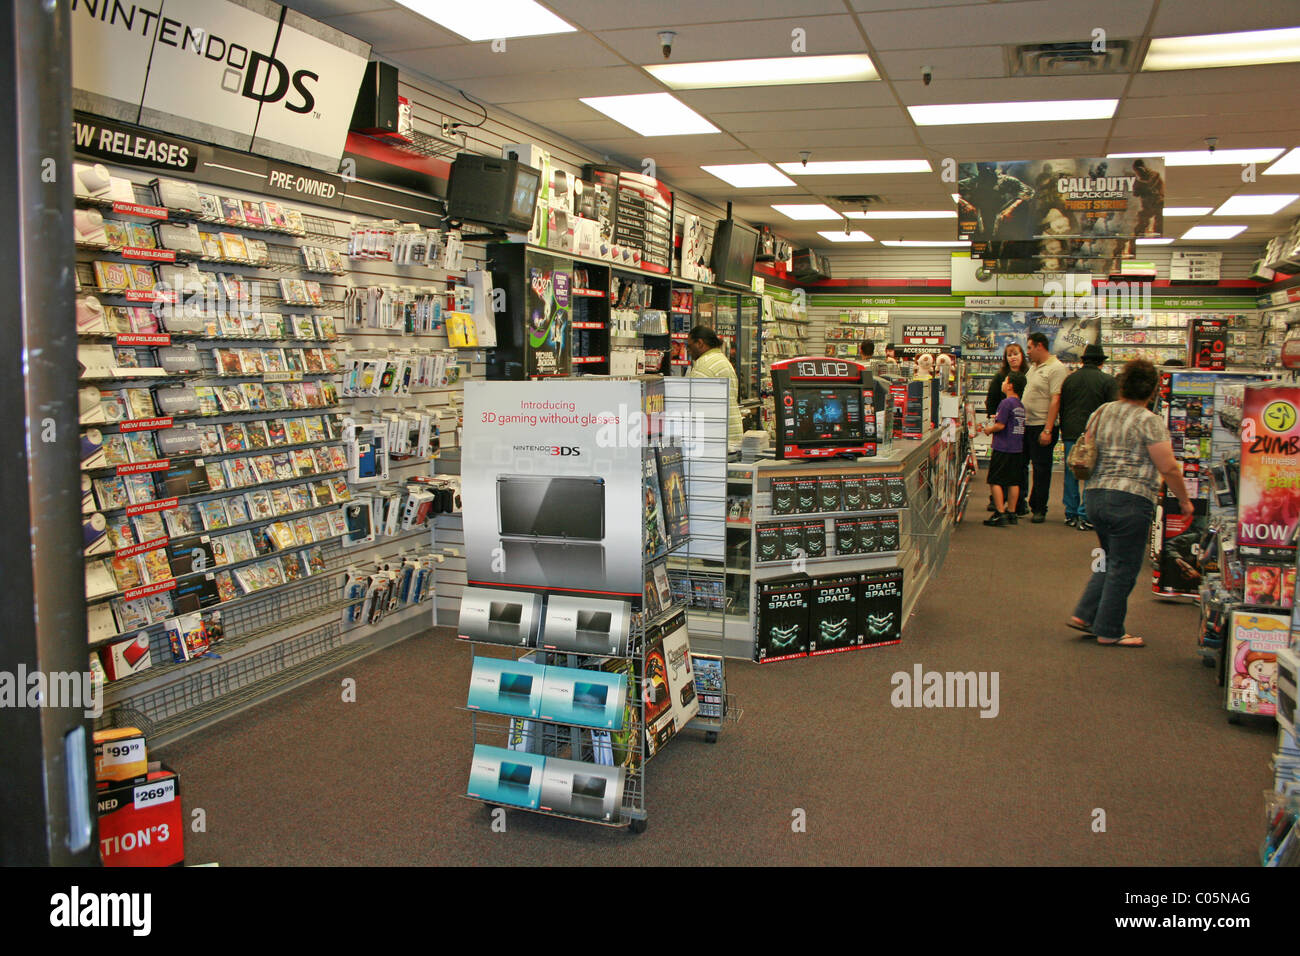 Inside of a Gamestop computer video game store, United States, February 2011. Stock Photo